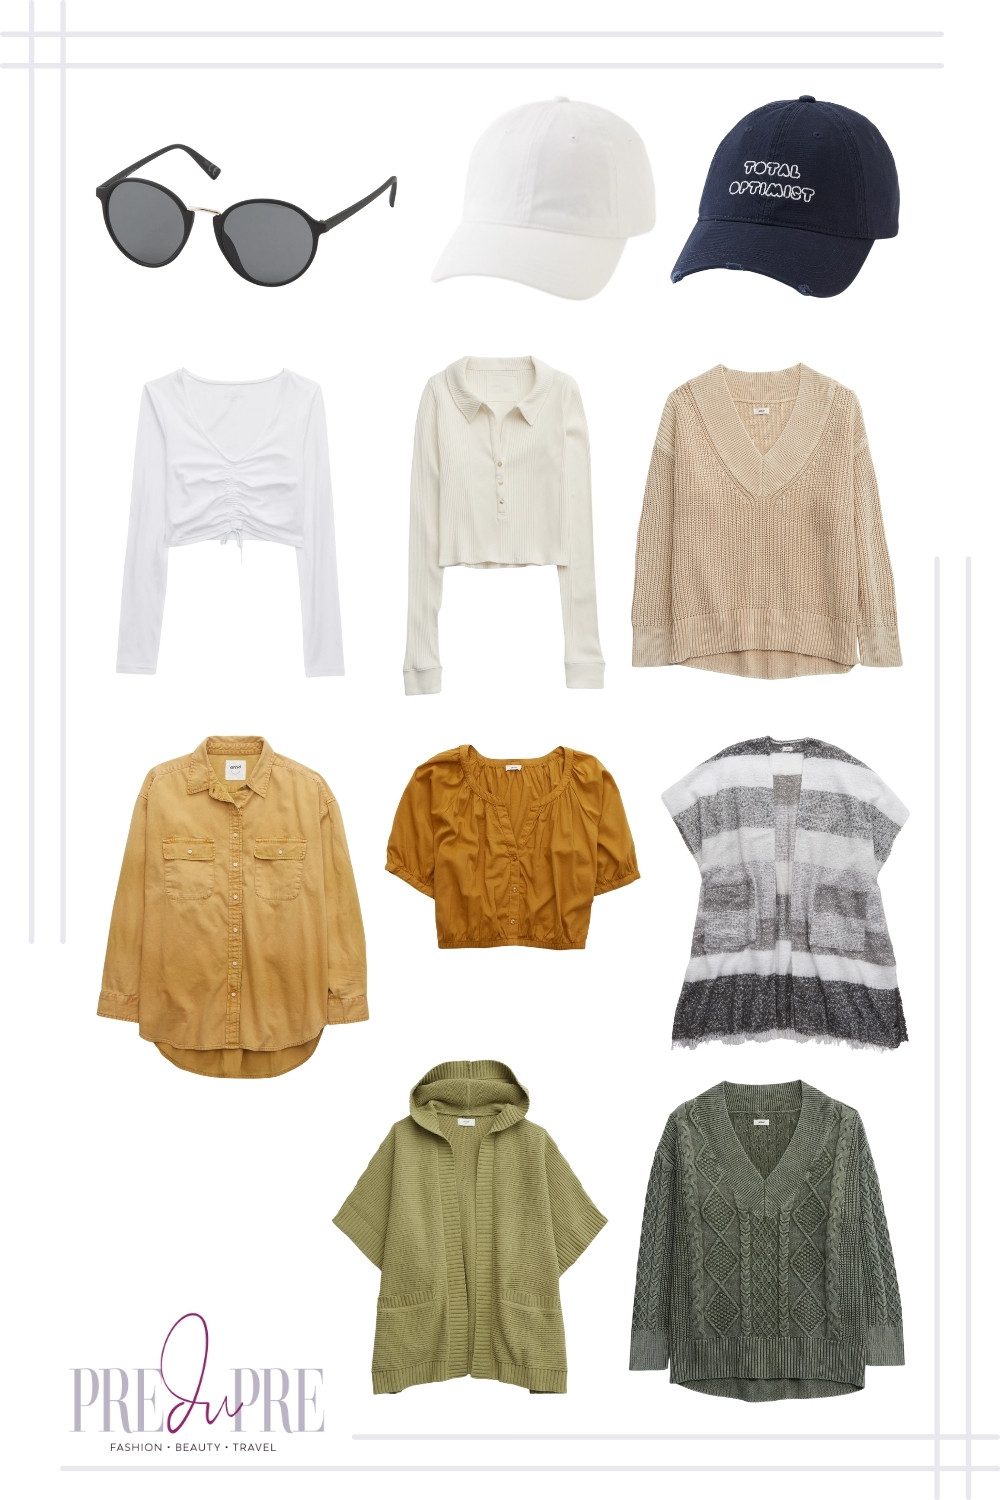 Aerie tops, sweaters, and poncho